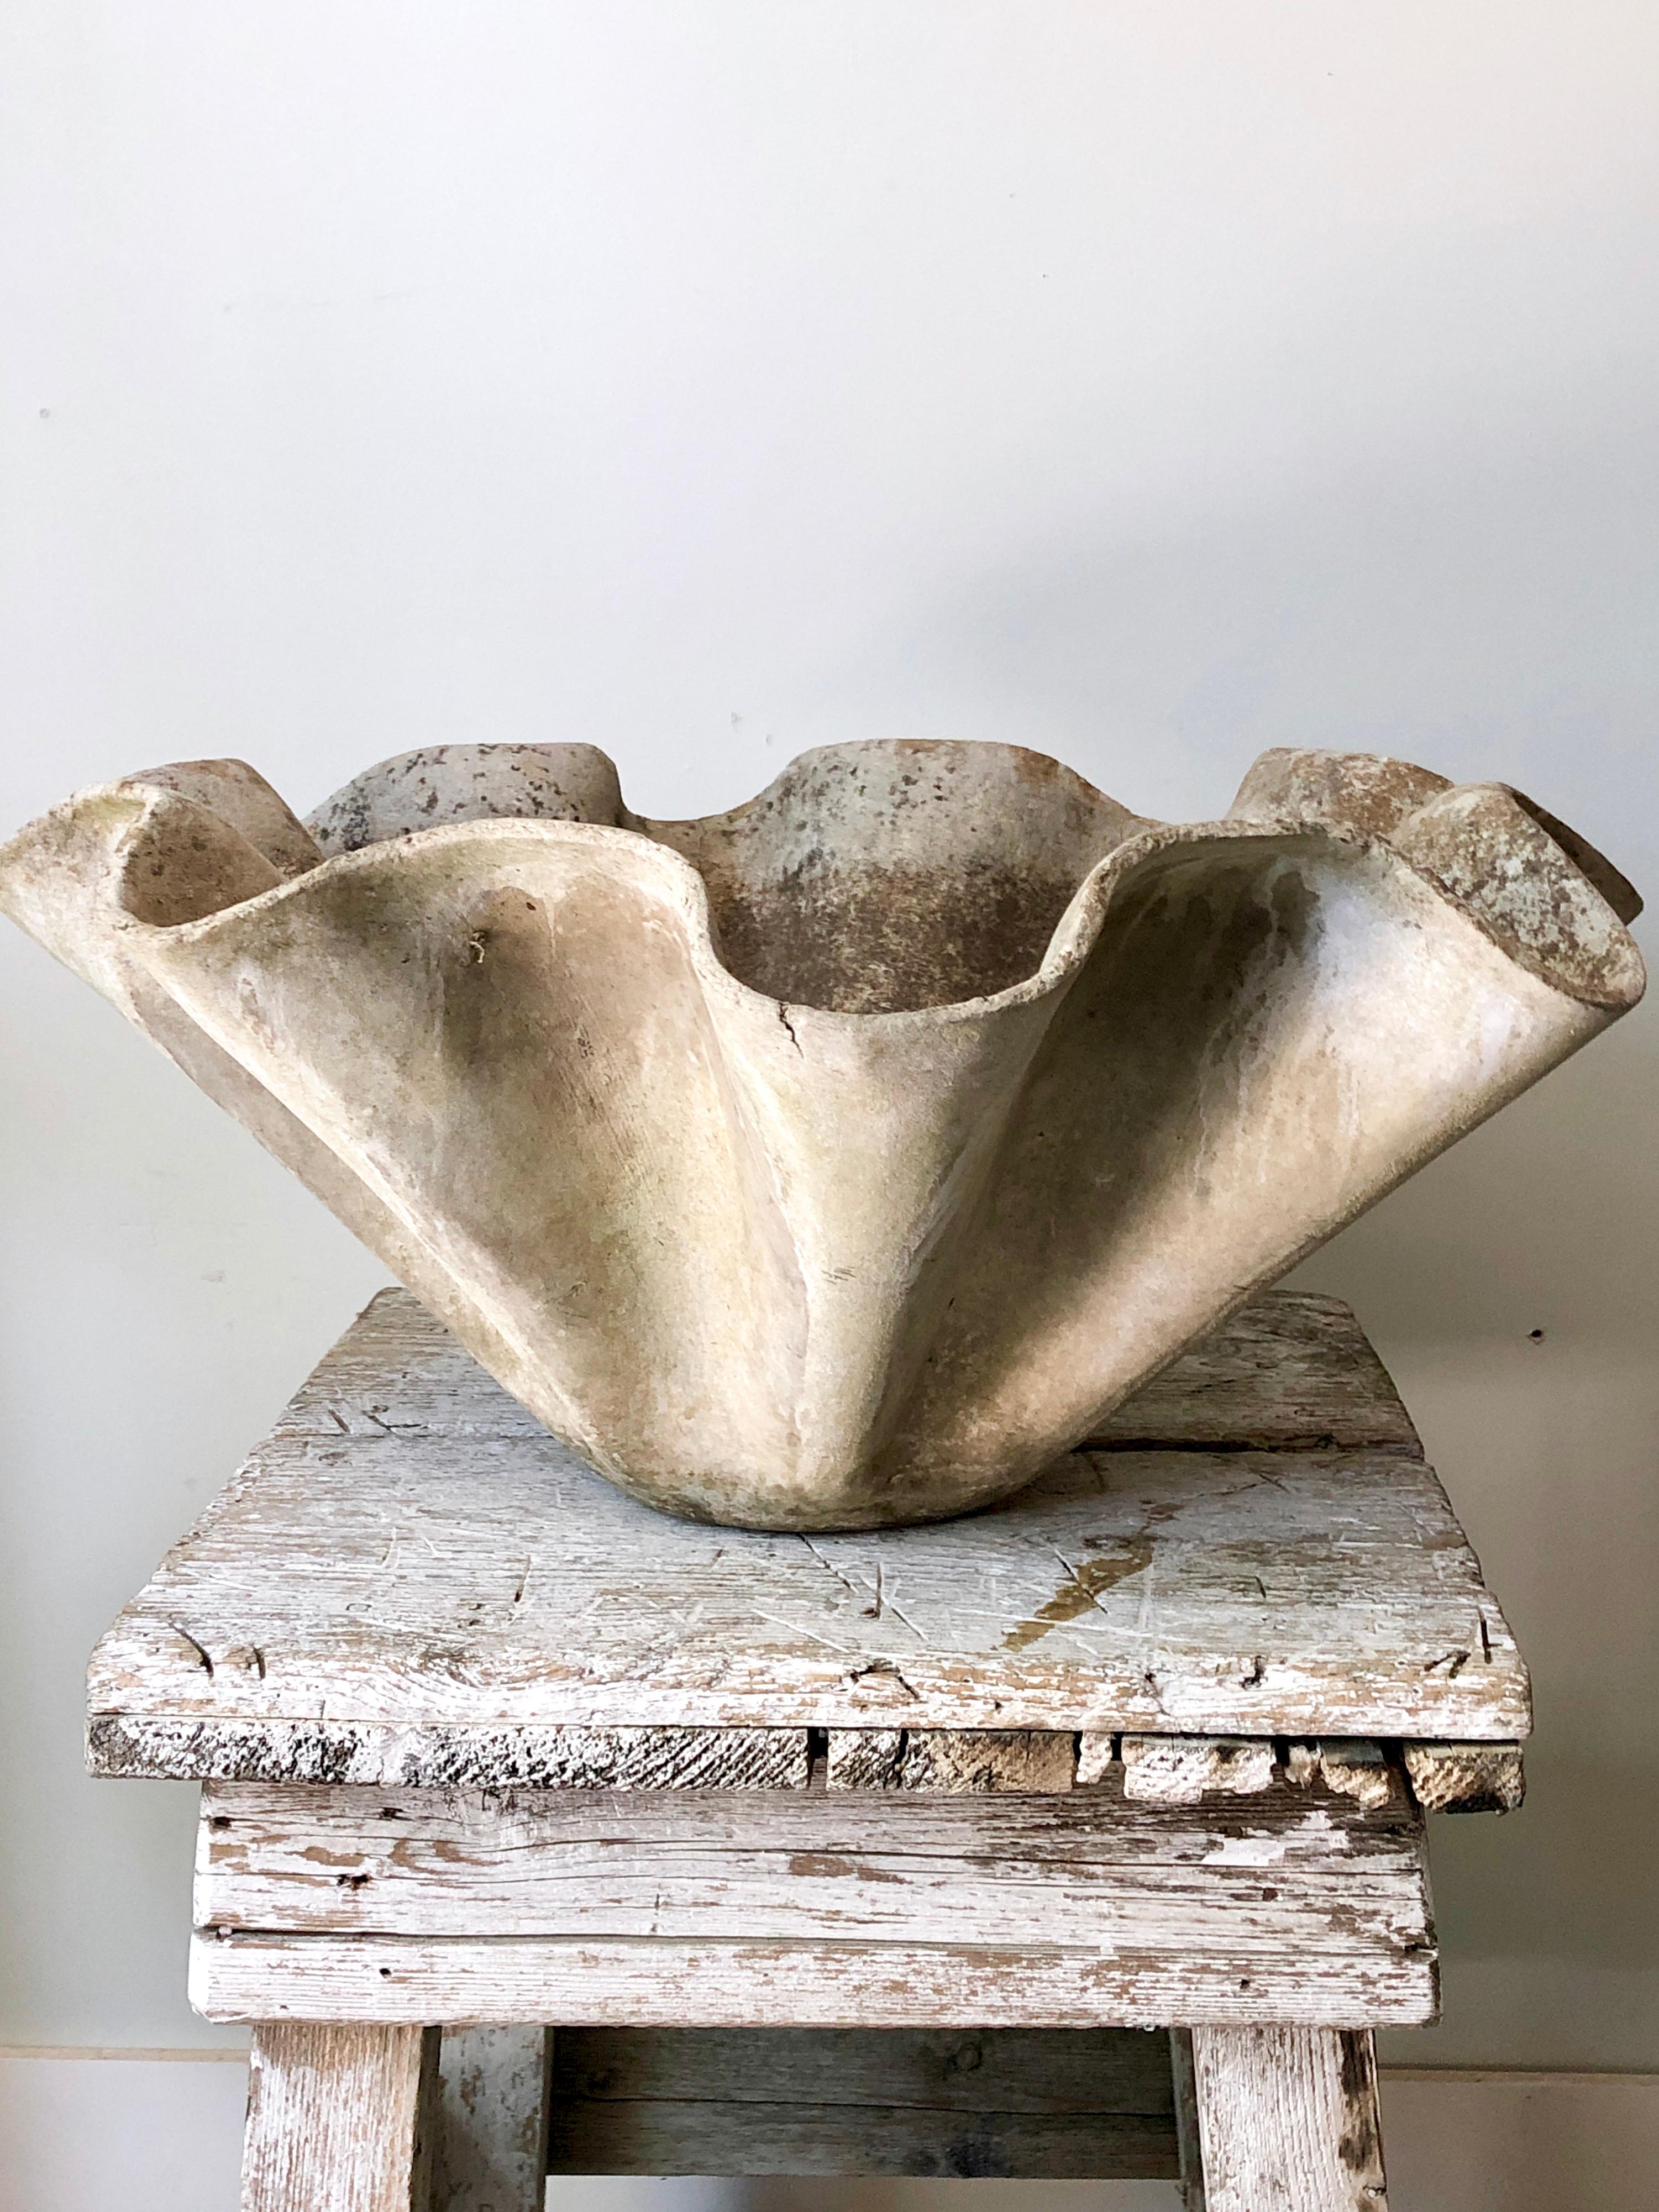 Large Willy Guhl Biomorphic Planter for Eternit. Sculptural garden object, classic timeless design with great worn patina. Perfect for inside or outside use.
 